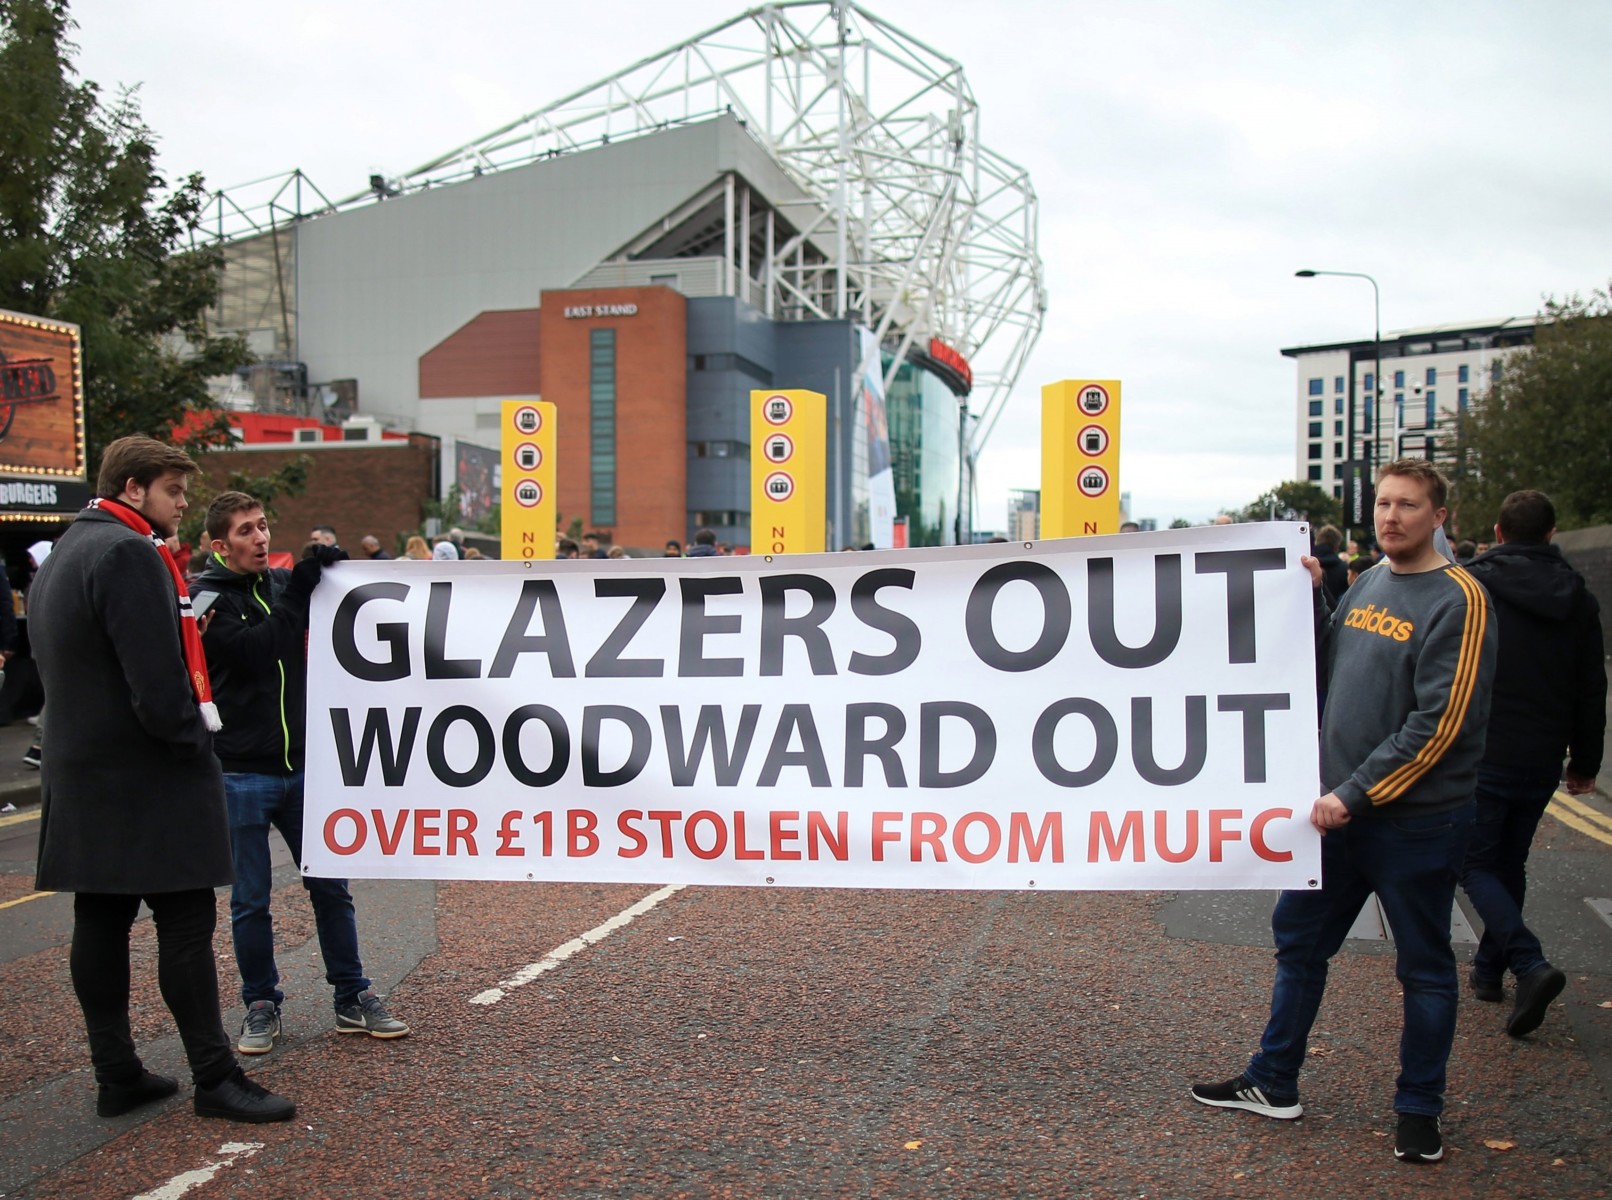 United fans want Glazer out for plunging them into debt